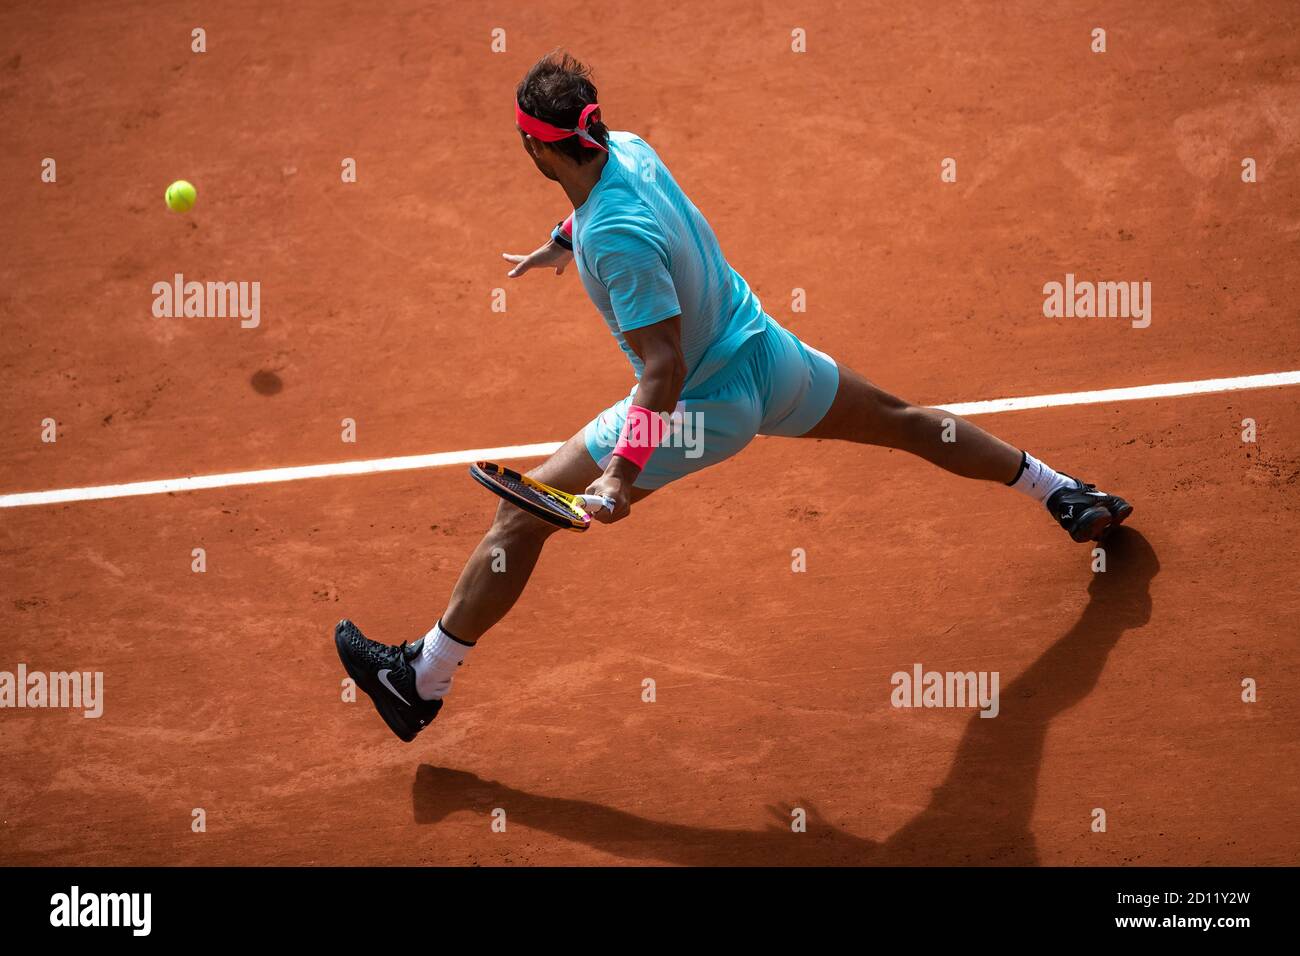 Paris, France. 4th Oct, 2020. Rafael Nadal competes during the men's singles 4th round match between Rafael Nadal of Spain and Sebastian Korda of the United States at the French Open tennis tournament 2020 at Roland Garros in Paris, France, Oct. 4, 2020. Credit: Aurelien Morissard/Xinhua/Alamy Live News Stock Photo